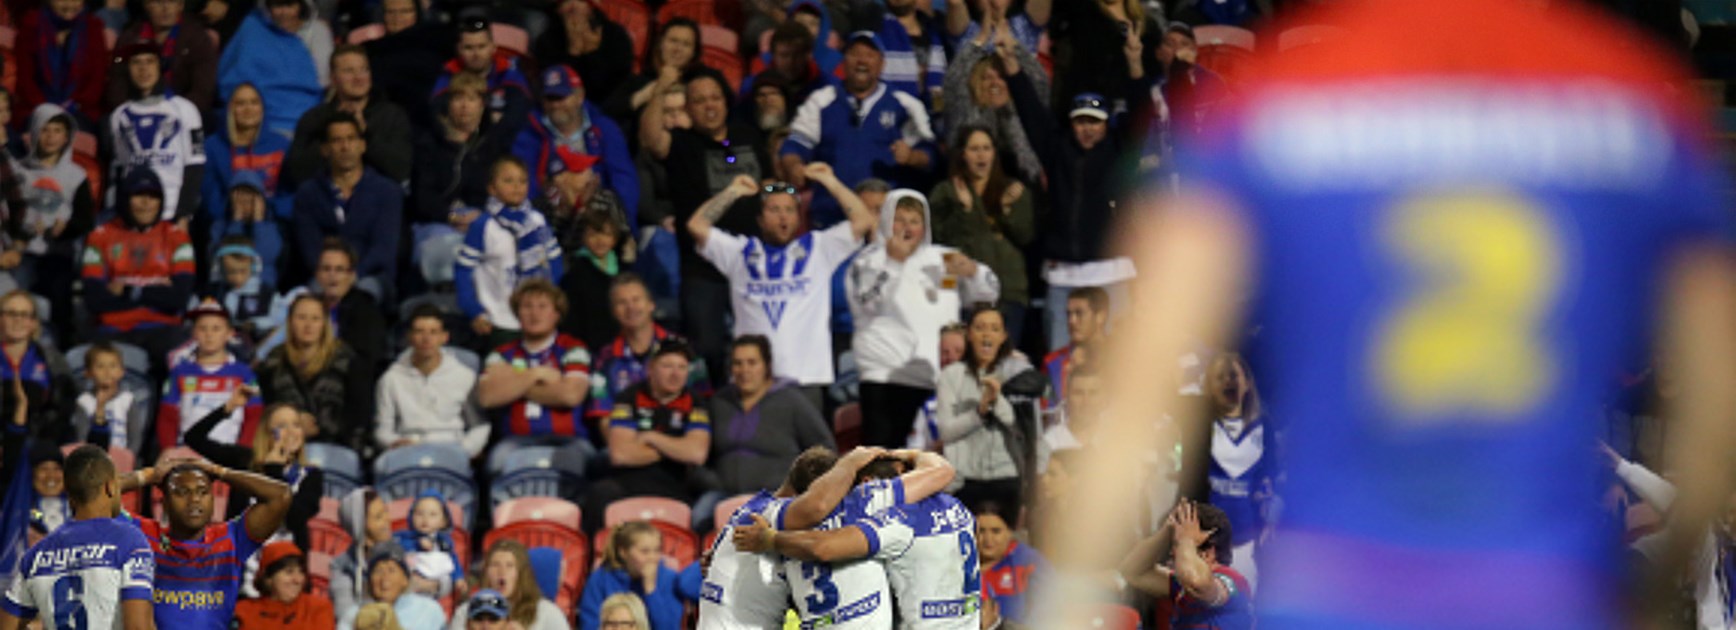 The Bulldogs celebrate a try against Newcastle at Hunter Stadium on Saturday night.